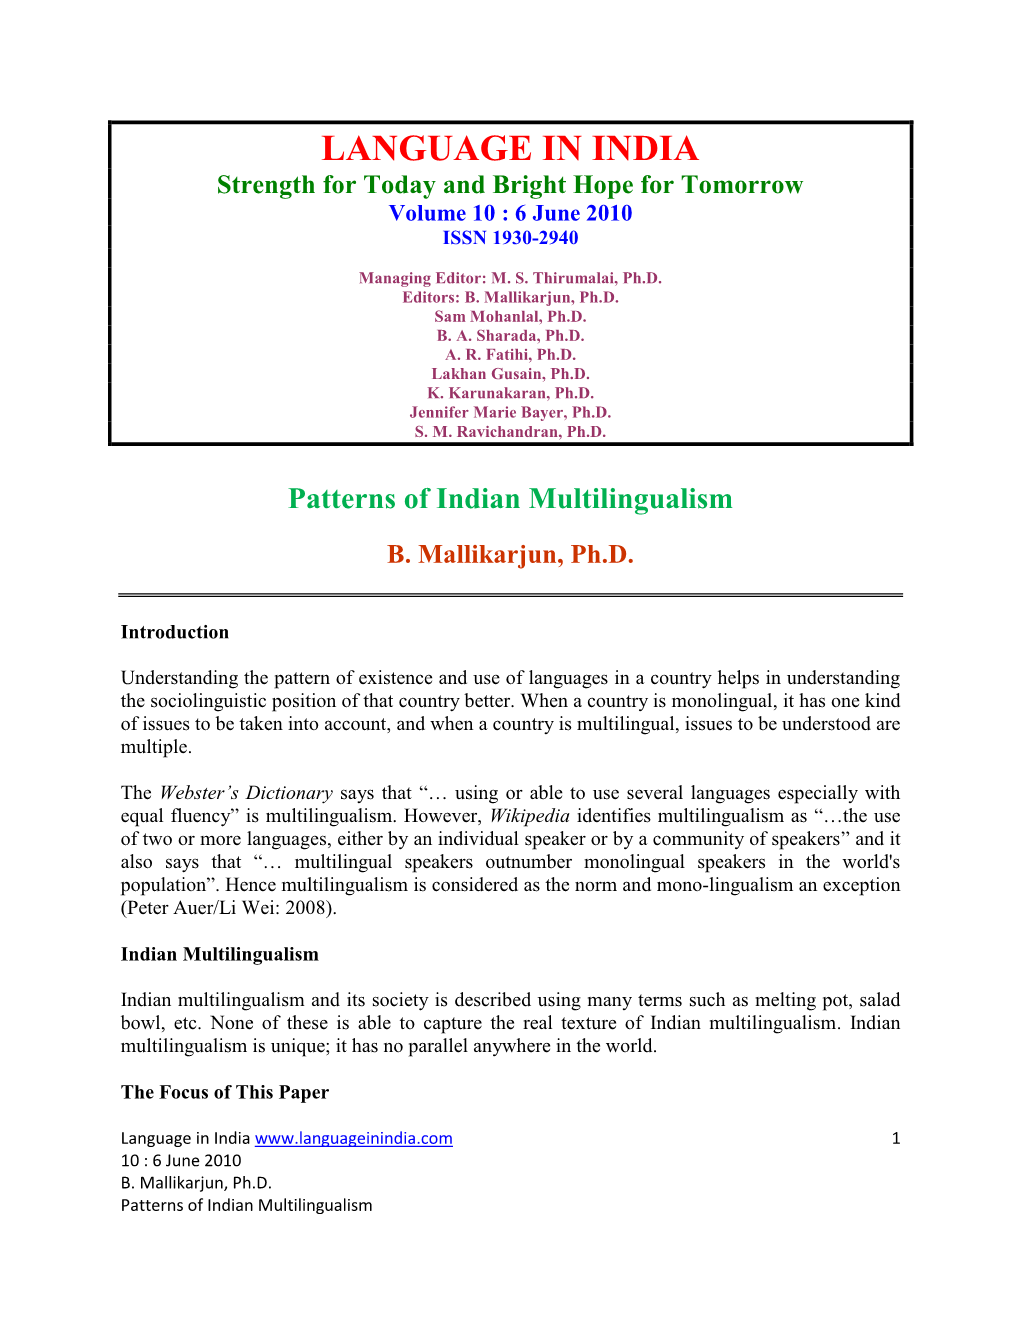 Patterns of Indian Multilingualism